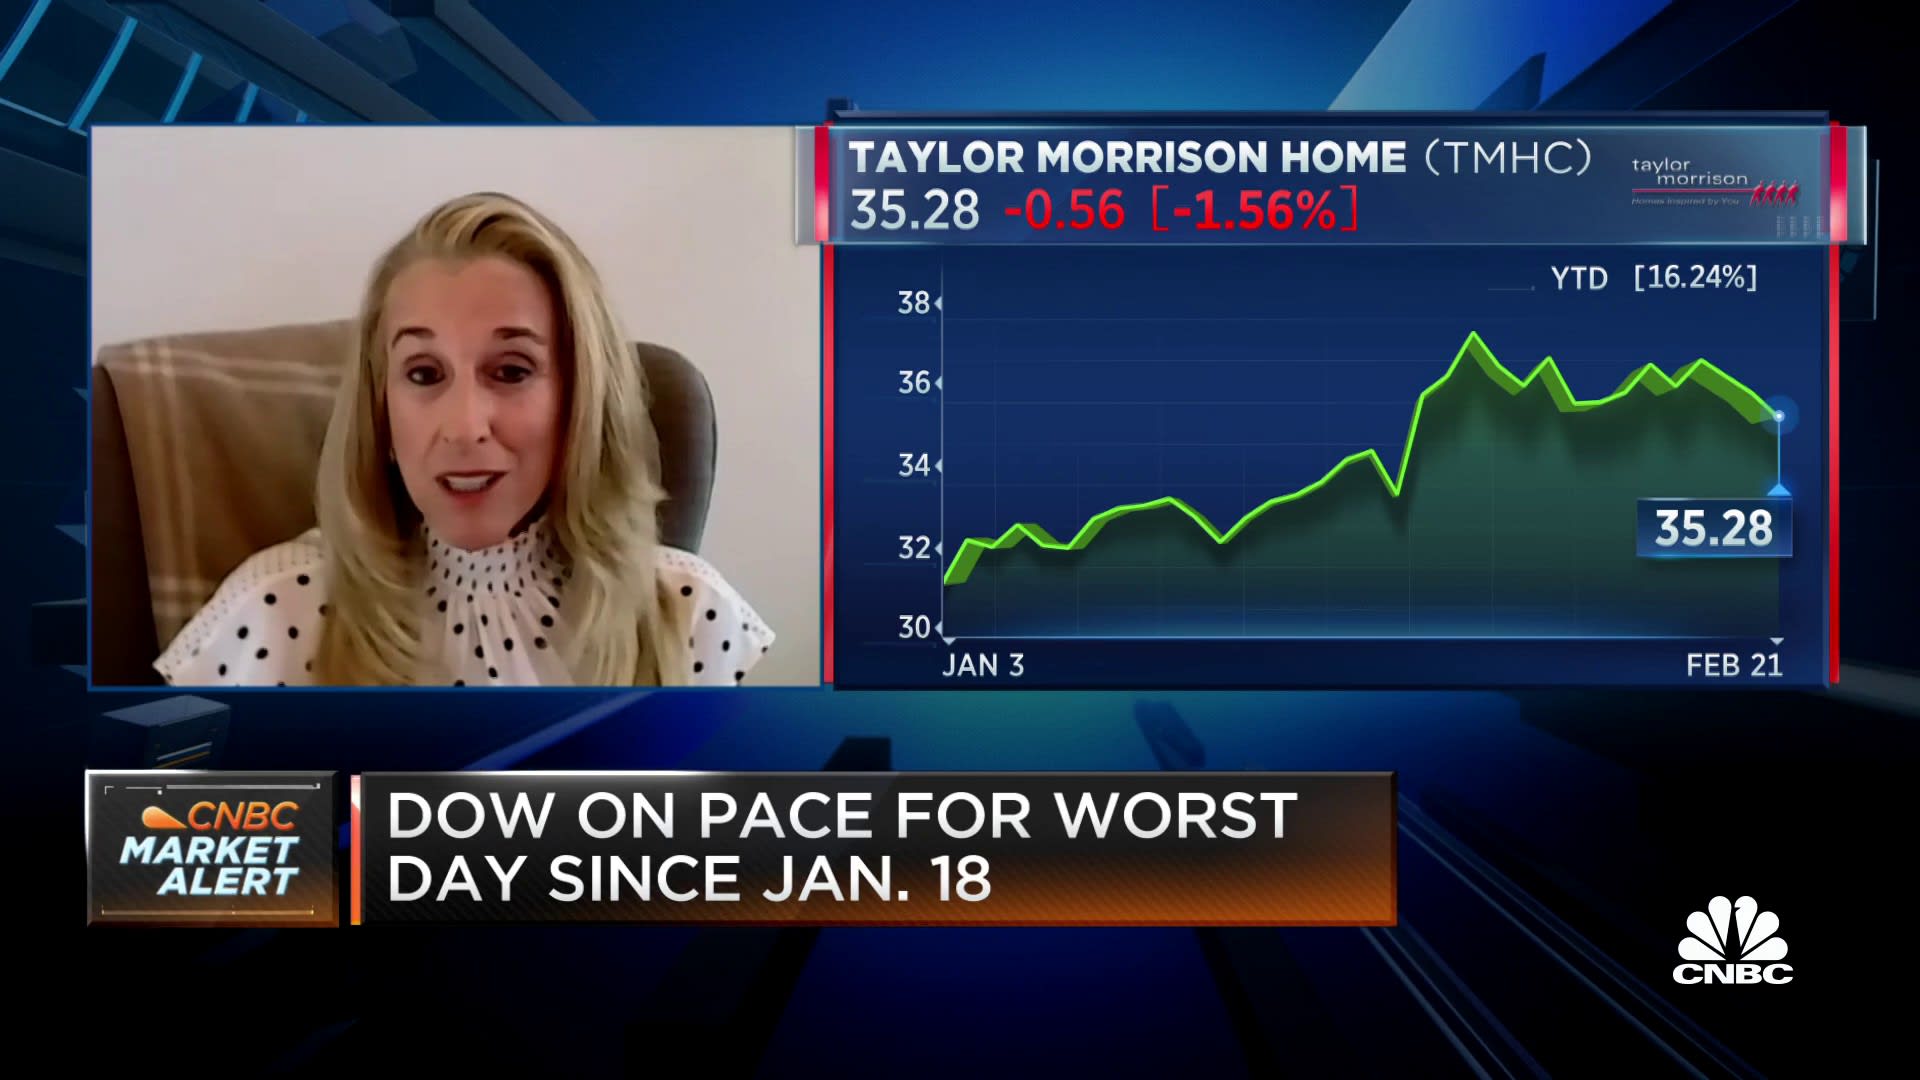 We're in a housing reset after years of unprecedented low rates, says Taylor Morrison Home CEO